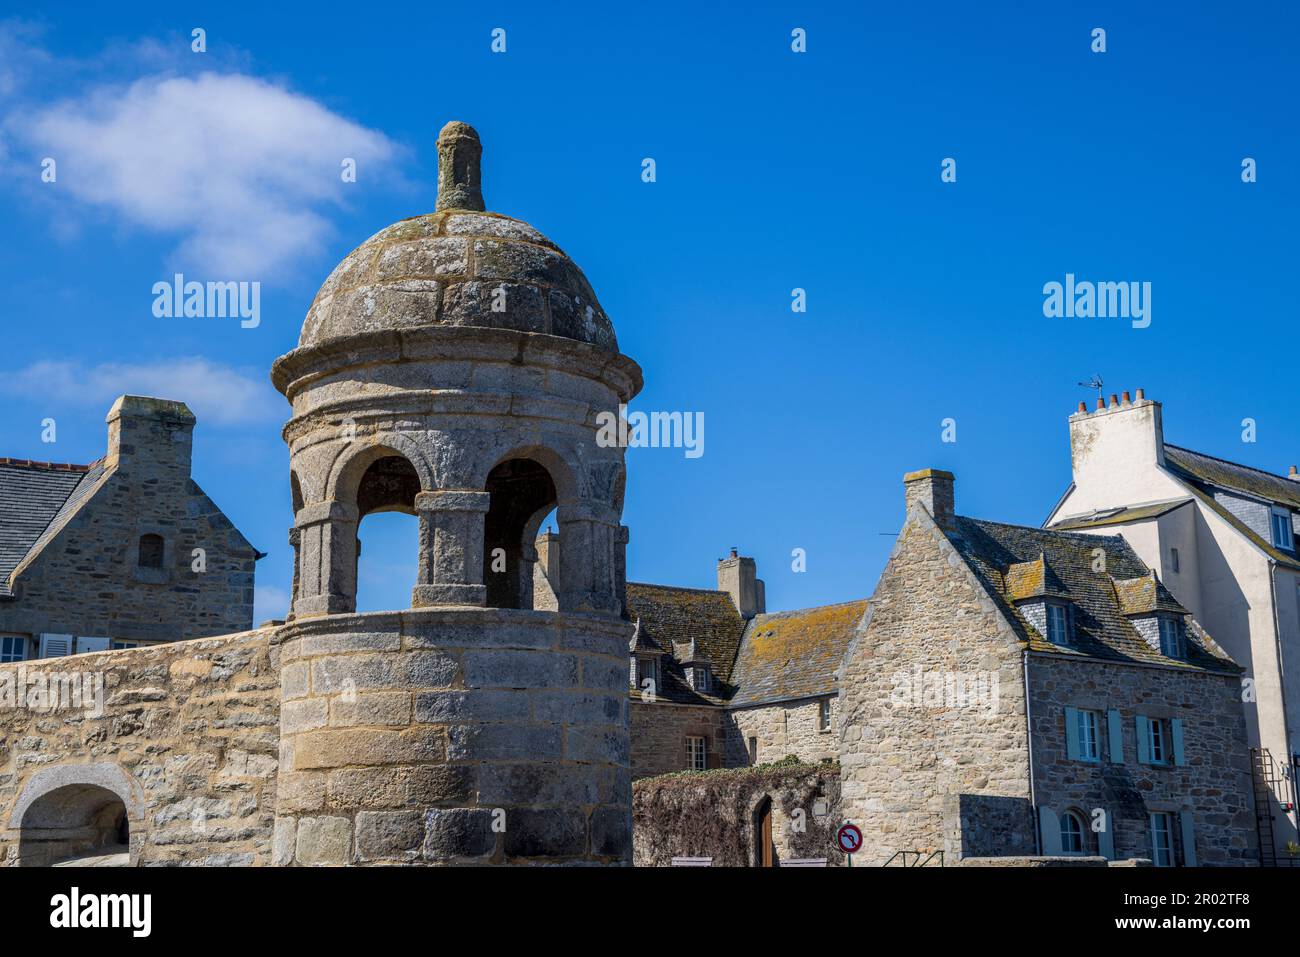 The turret of the old harbour defences in Roscoff, Brittany, France Stock Photo